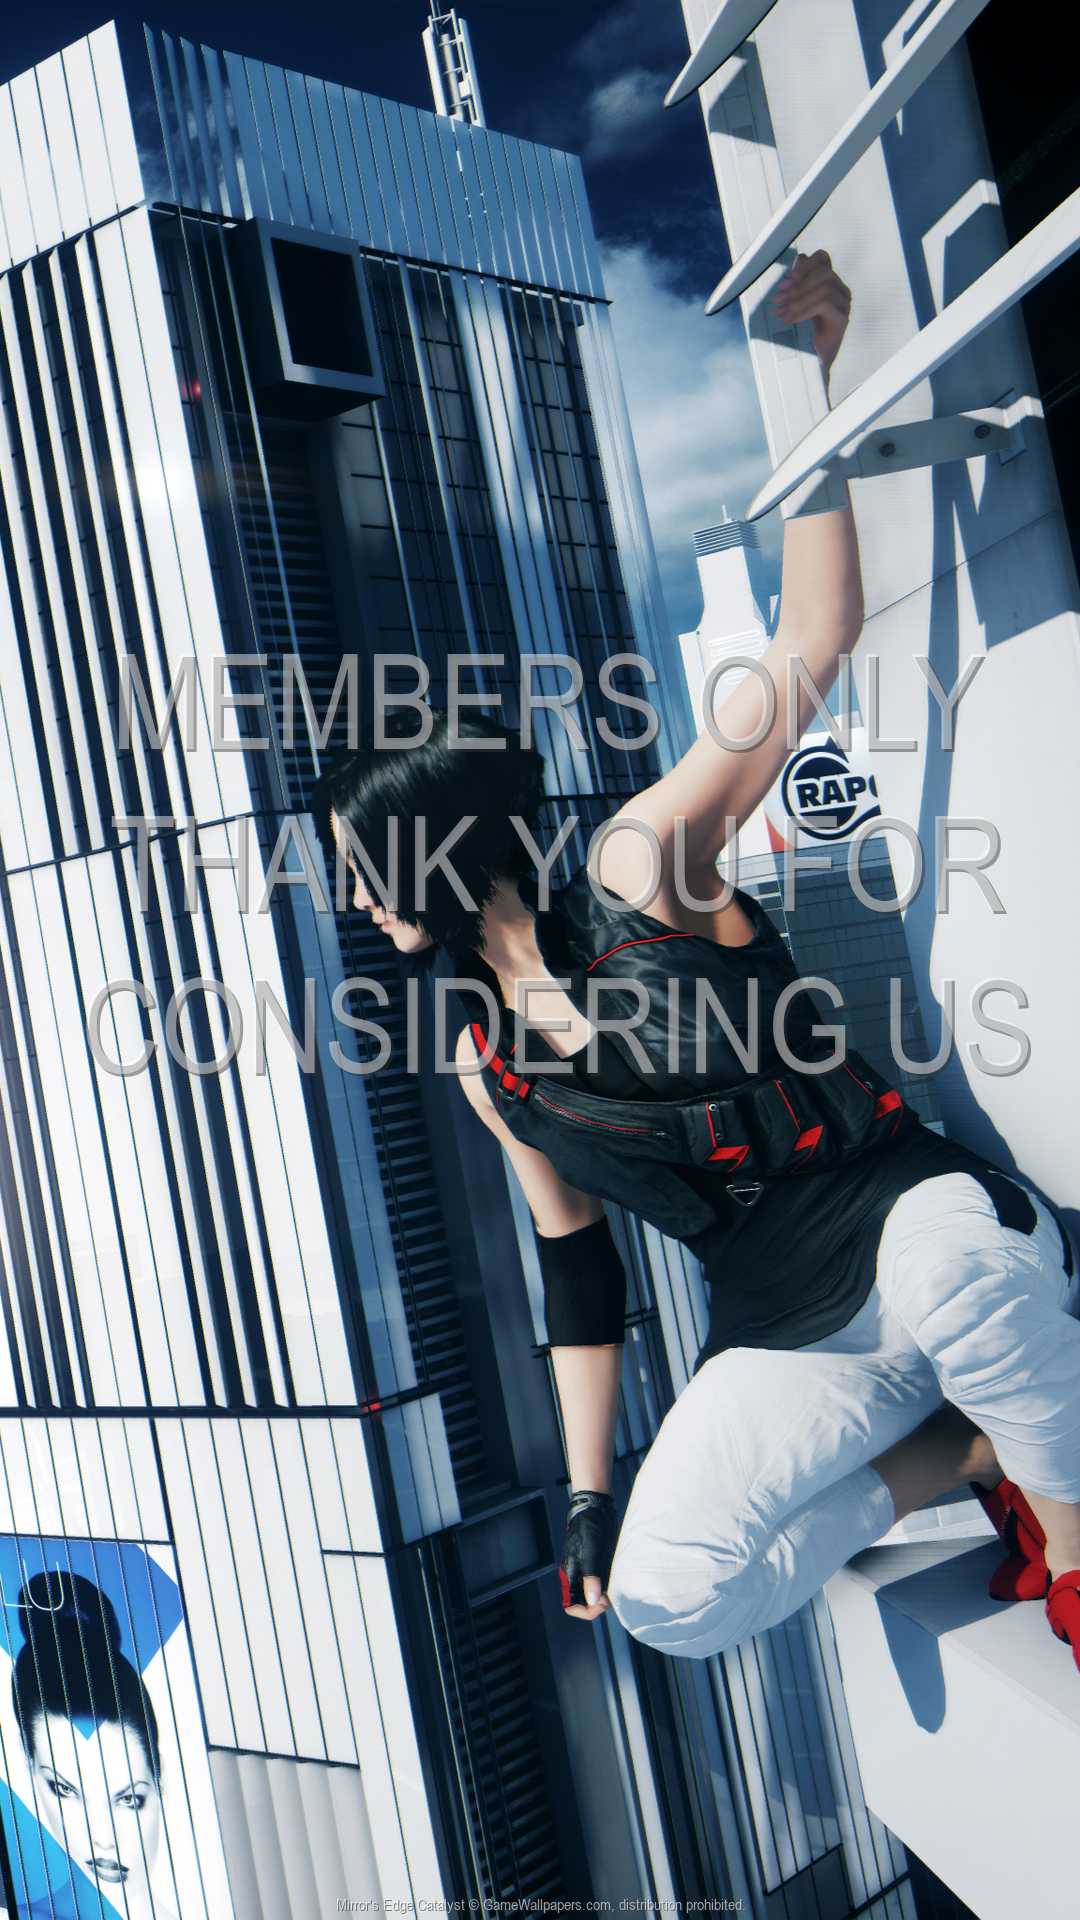 Mirror's Edge: Catalyst 1080p Vertical Mobile wallpaper or background 01